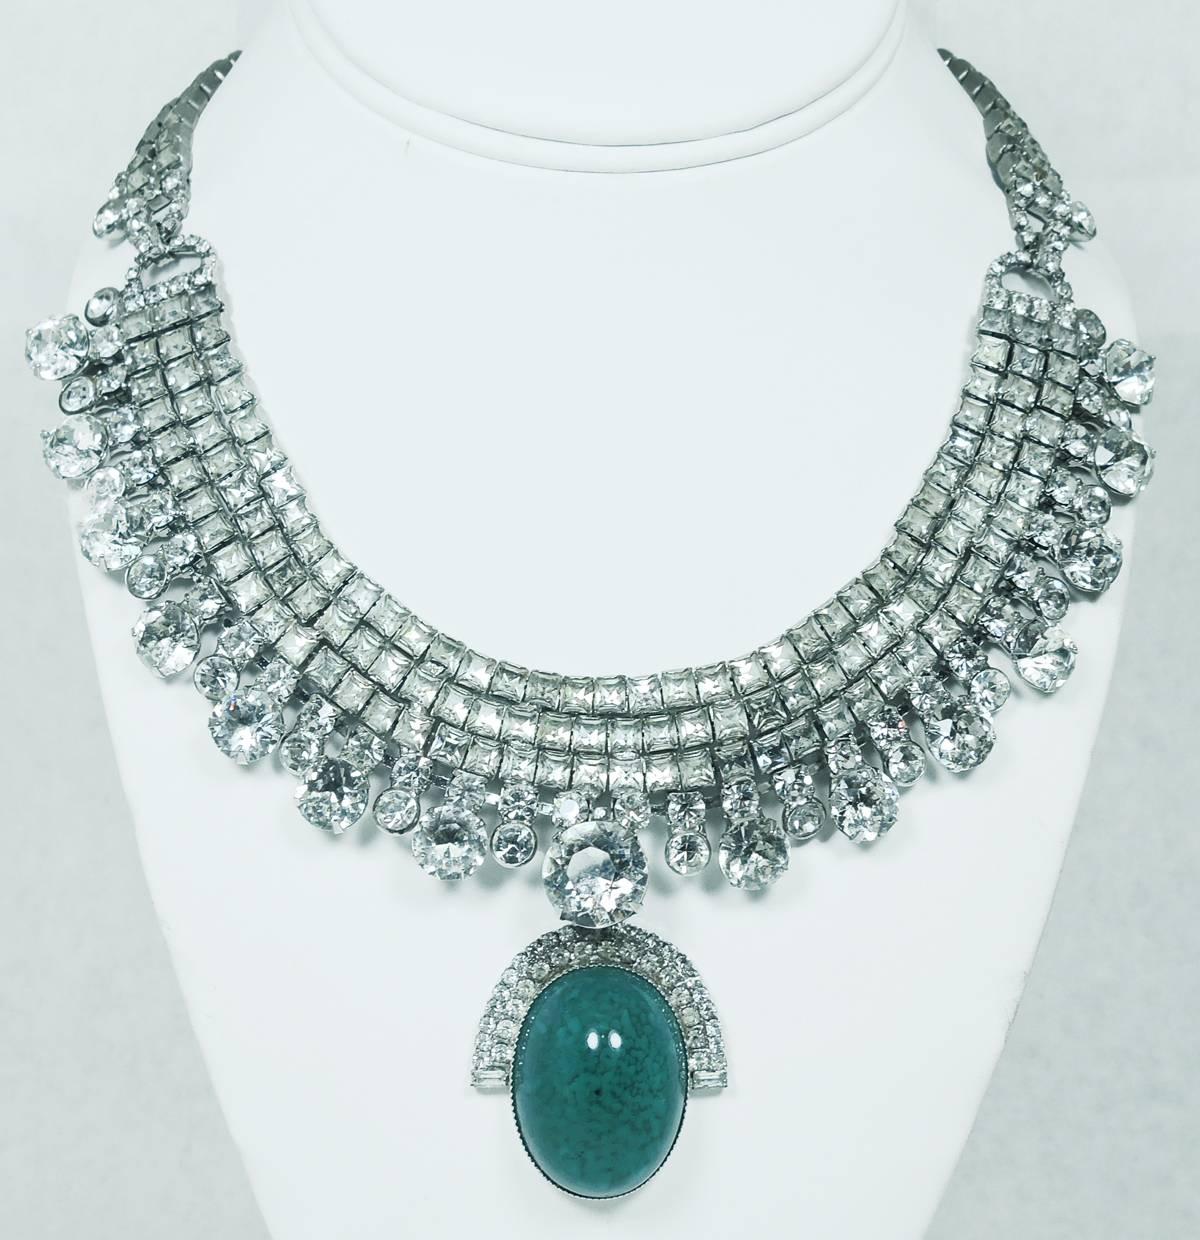 This vintage 1980s stunning, one-of-kind, necklace was made by Robert Sorrell. It was designed with three rows of beautiful squared shaped crystals that lead down to round crystals at the base of the necklace. It has a domed shaped green cabochon